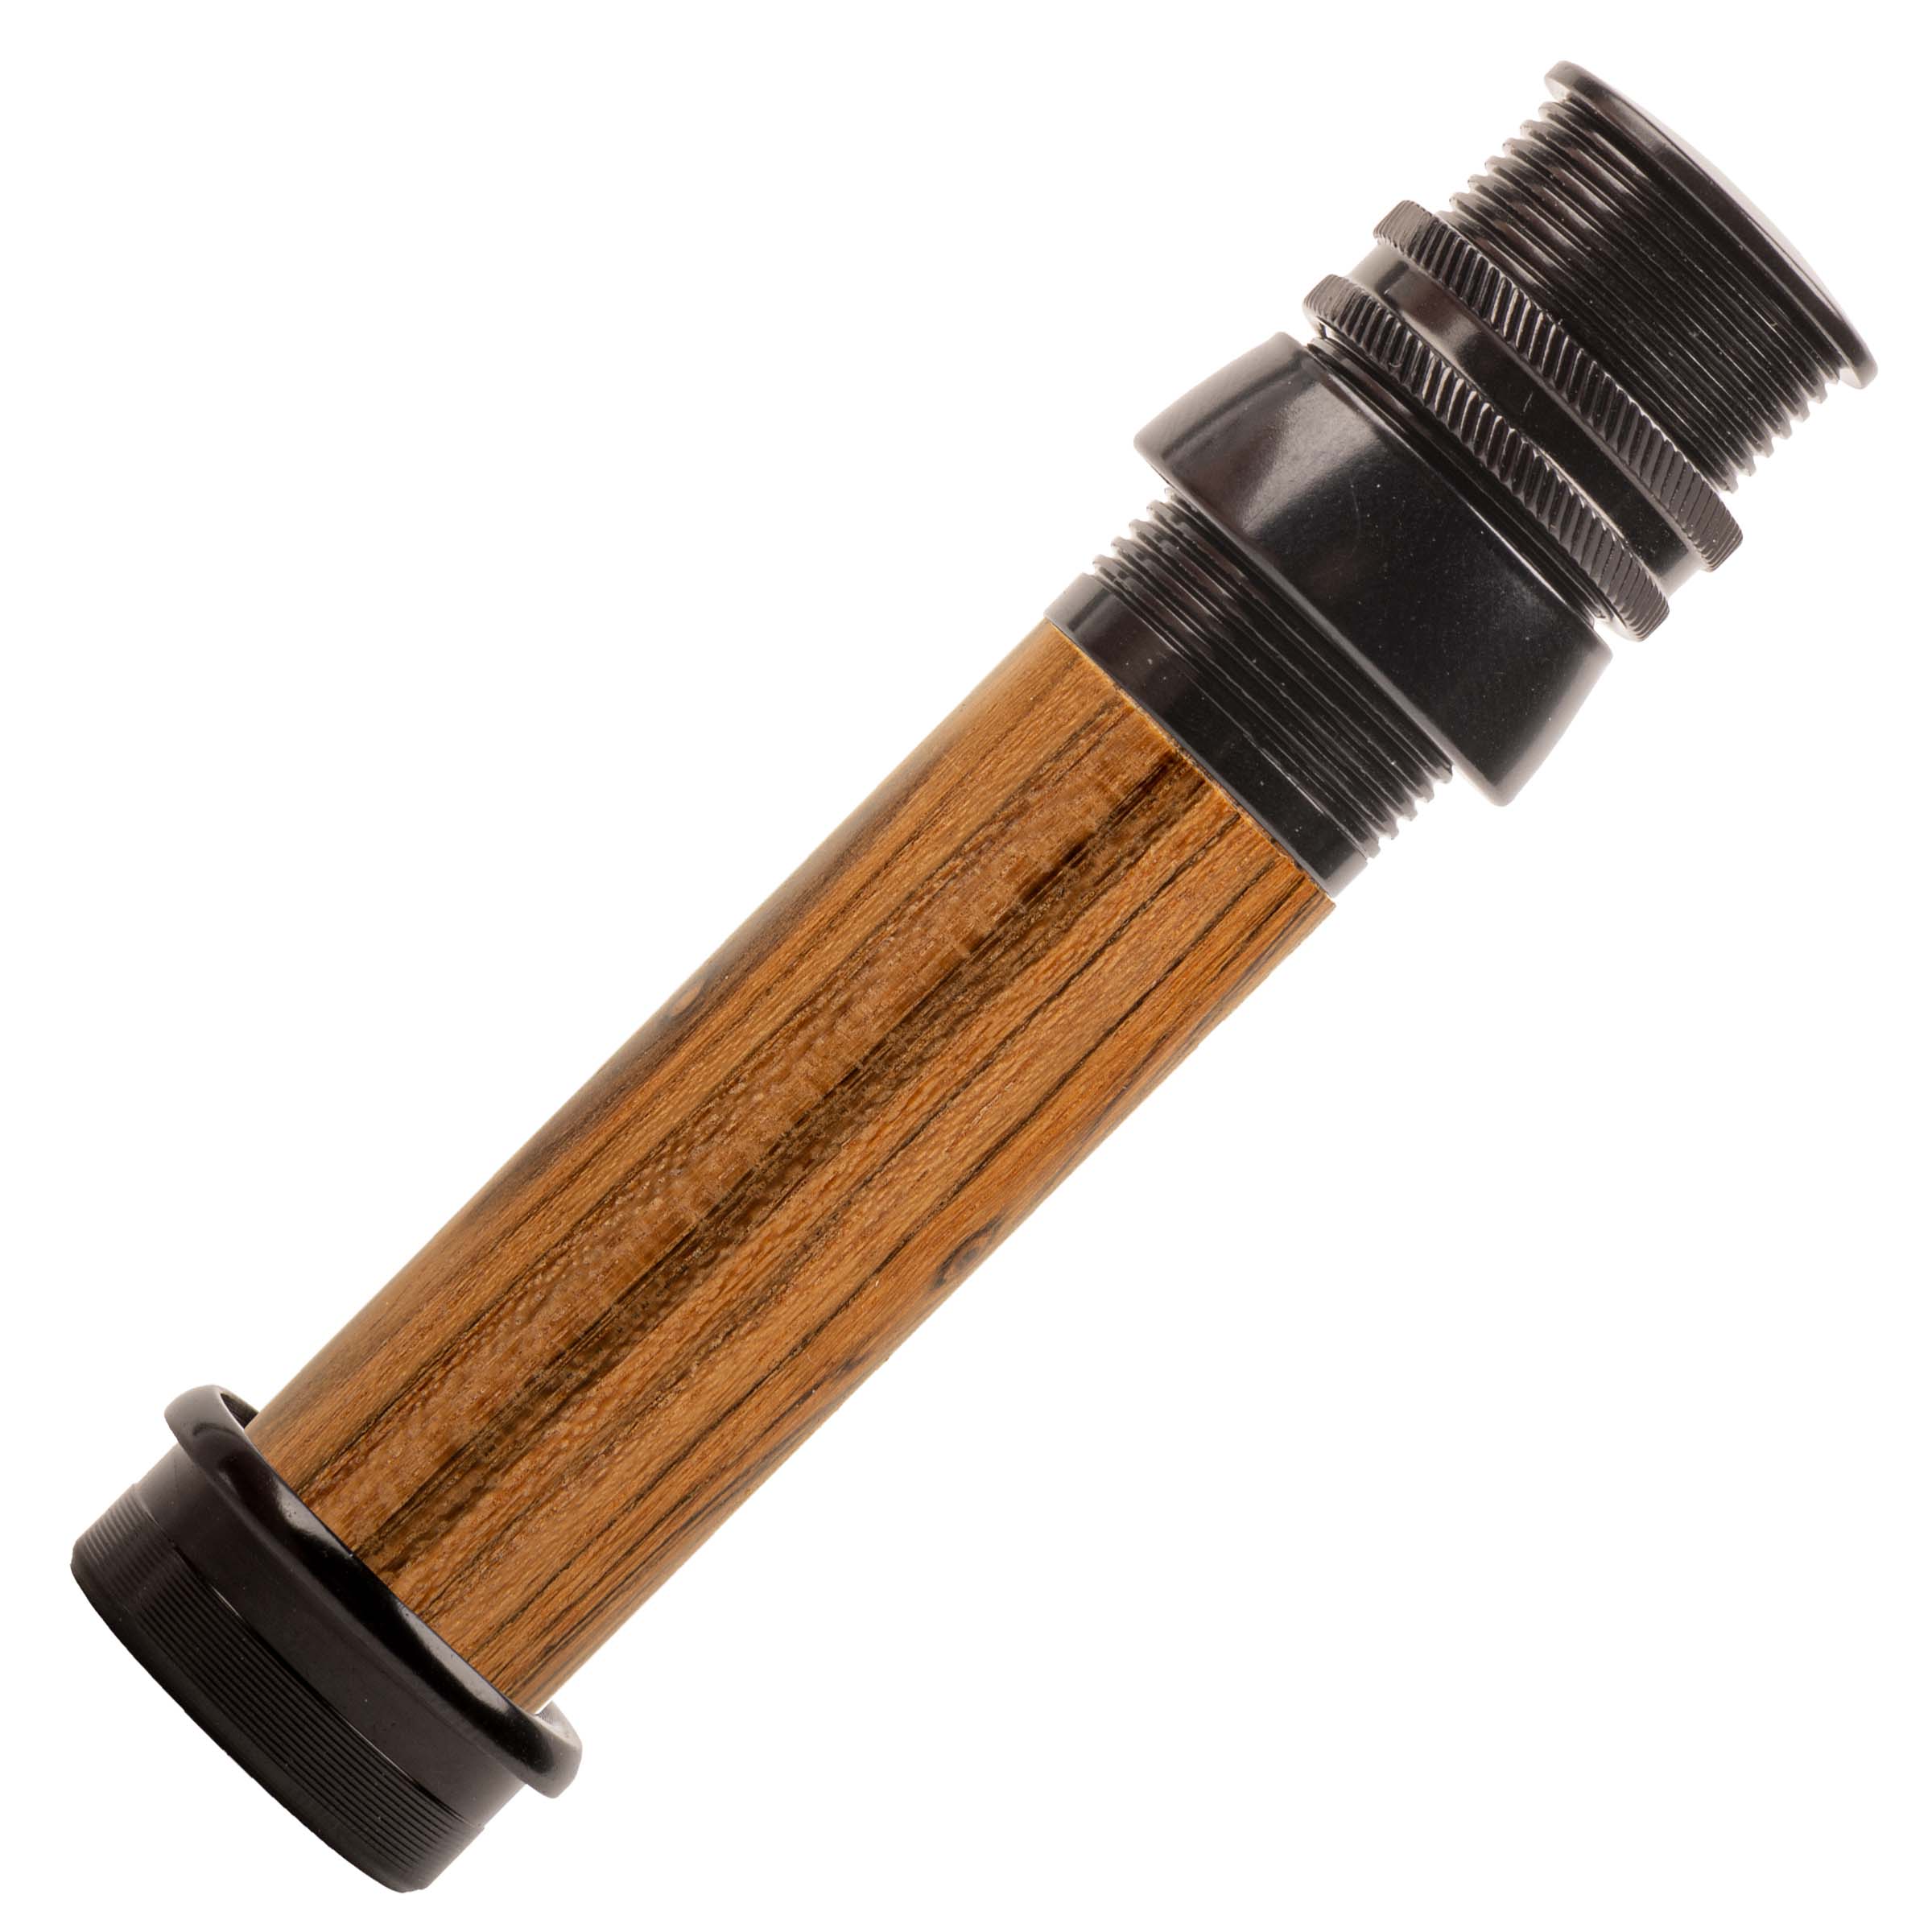 REC Model ABS Anodized Aluminum Fly Rod Reel Seat